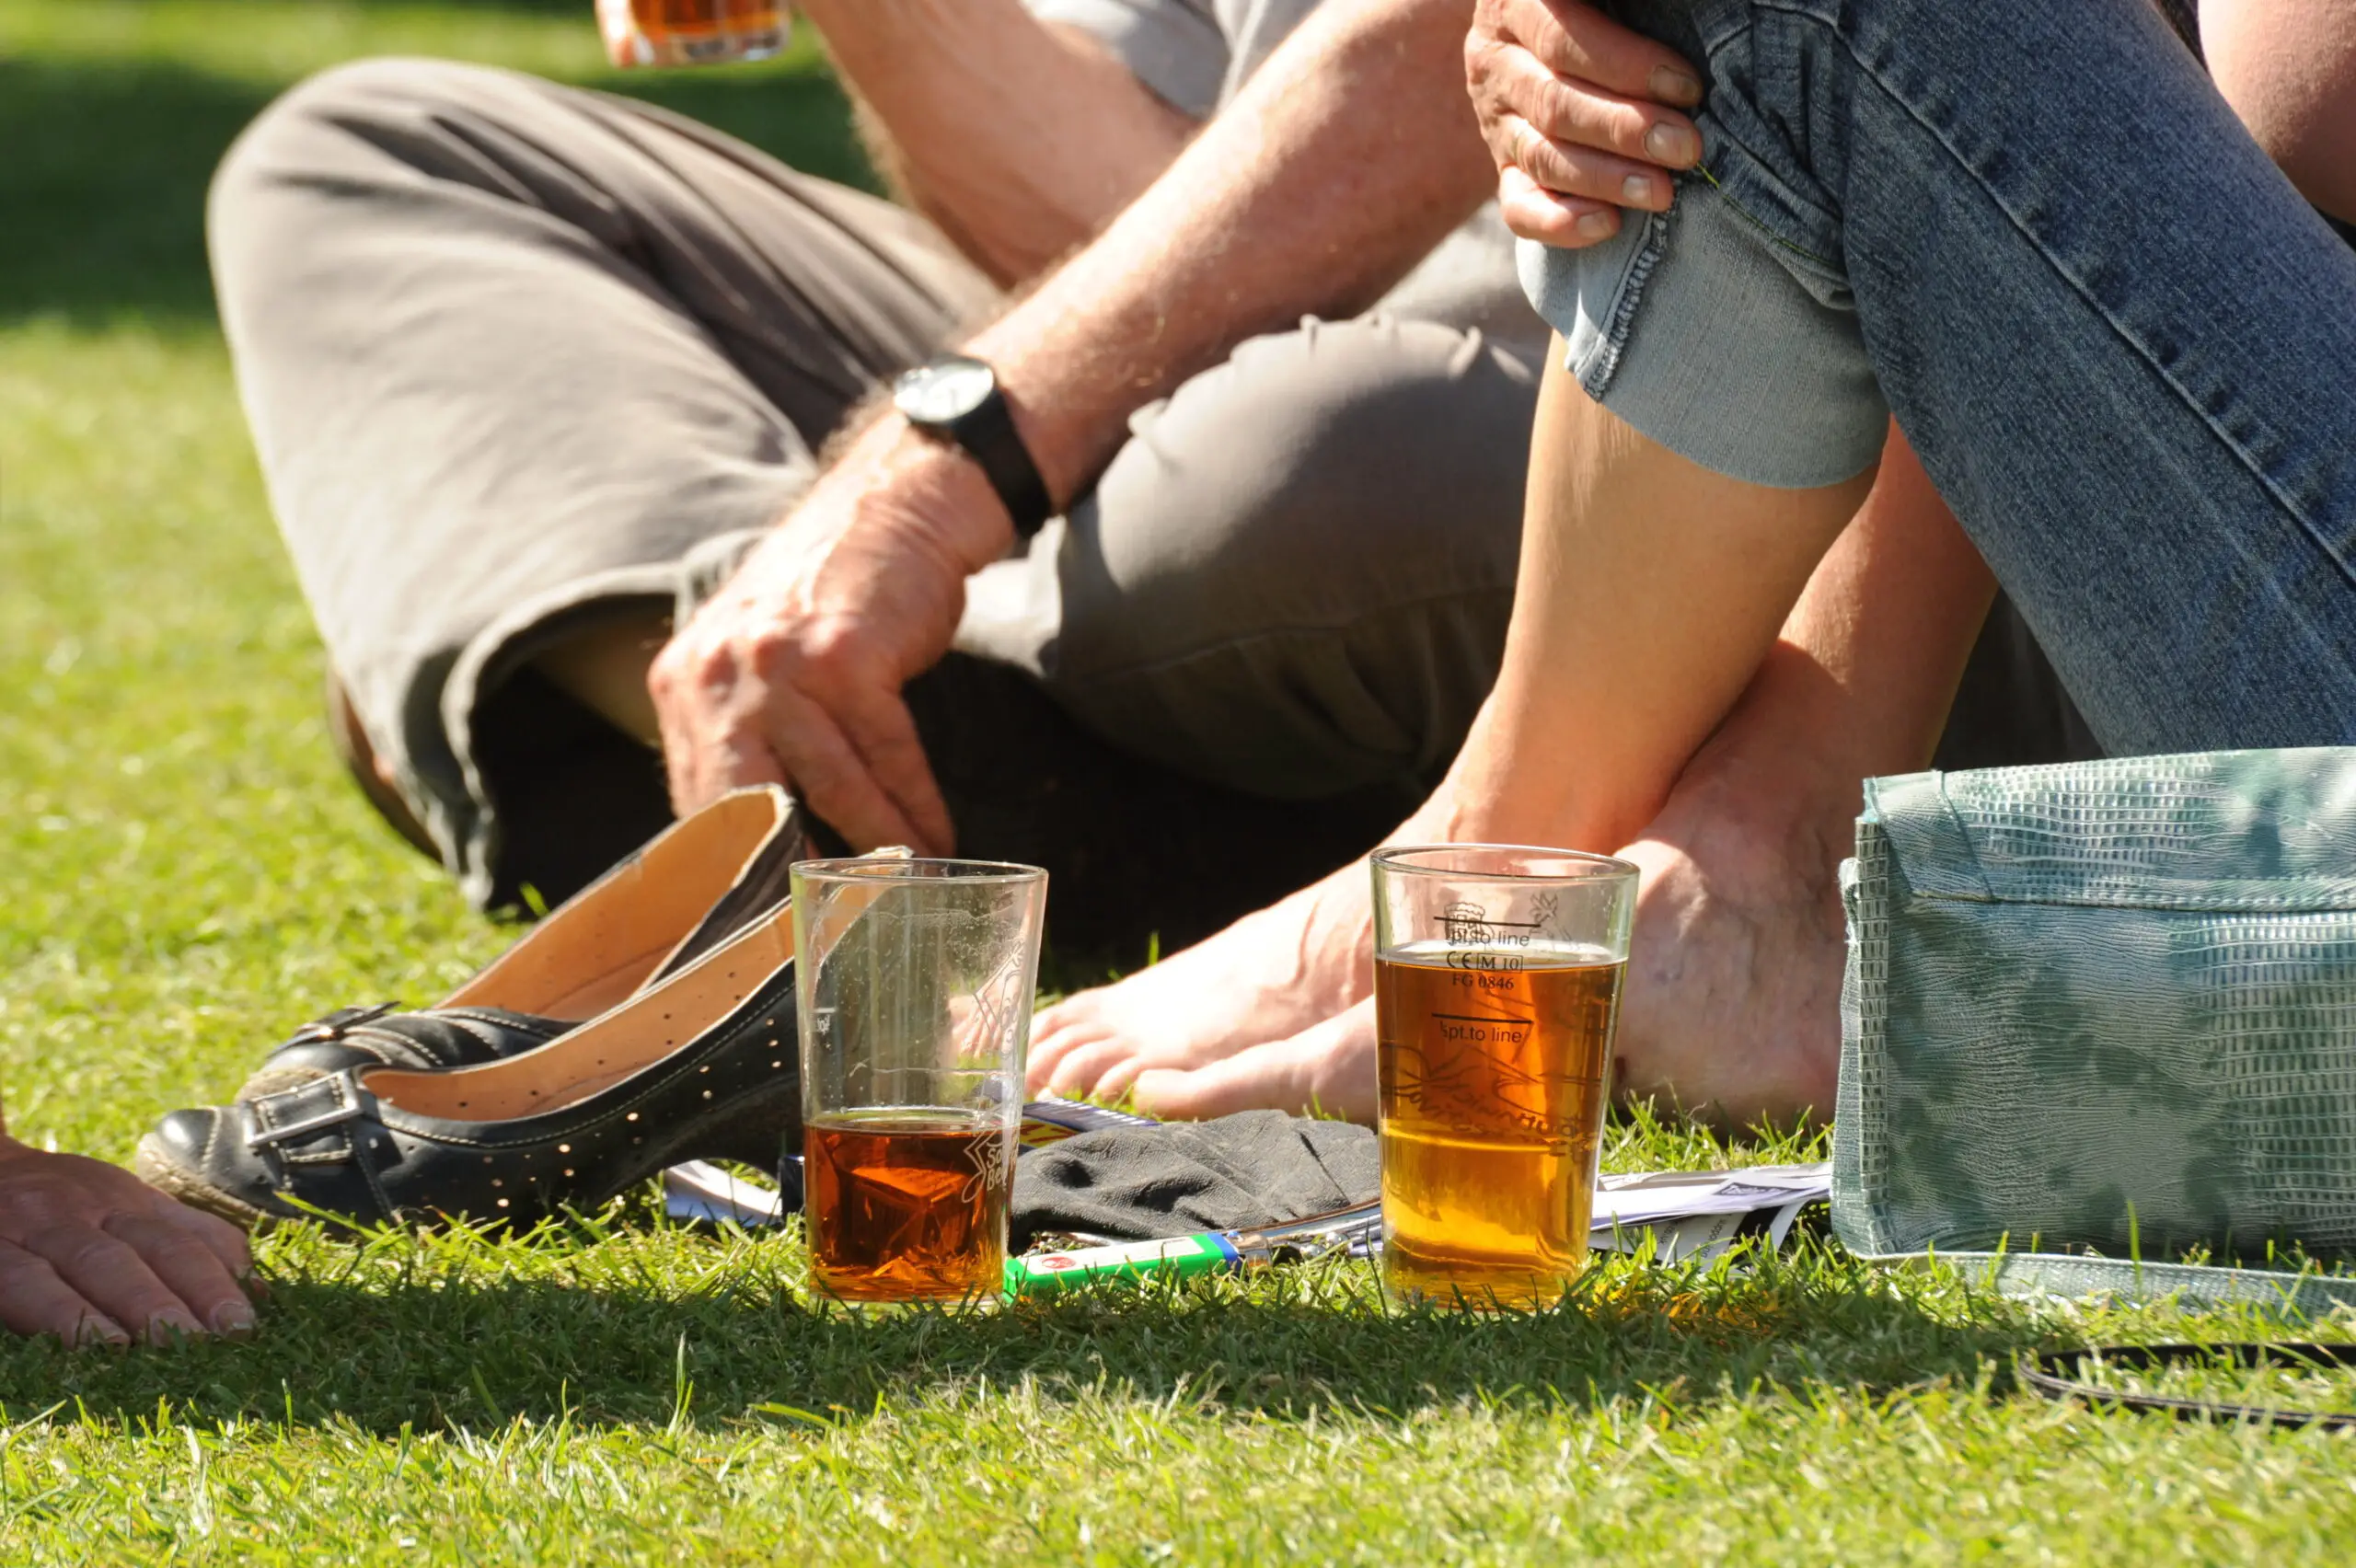 Couple Drinking Beer on Lawn